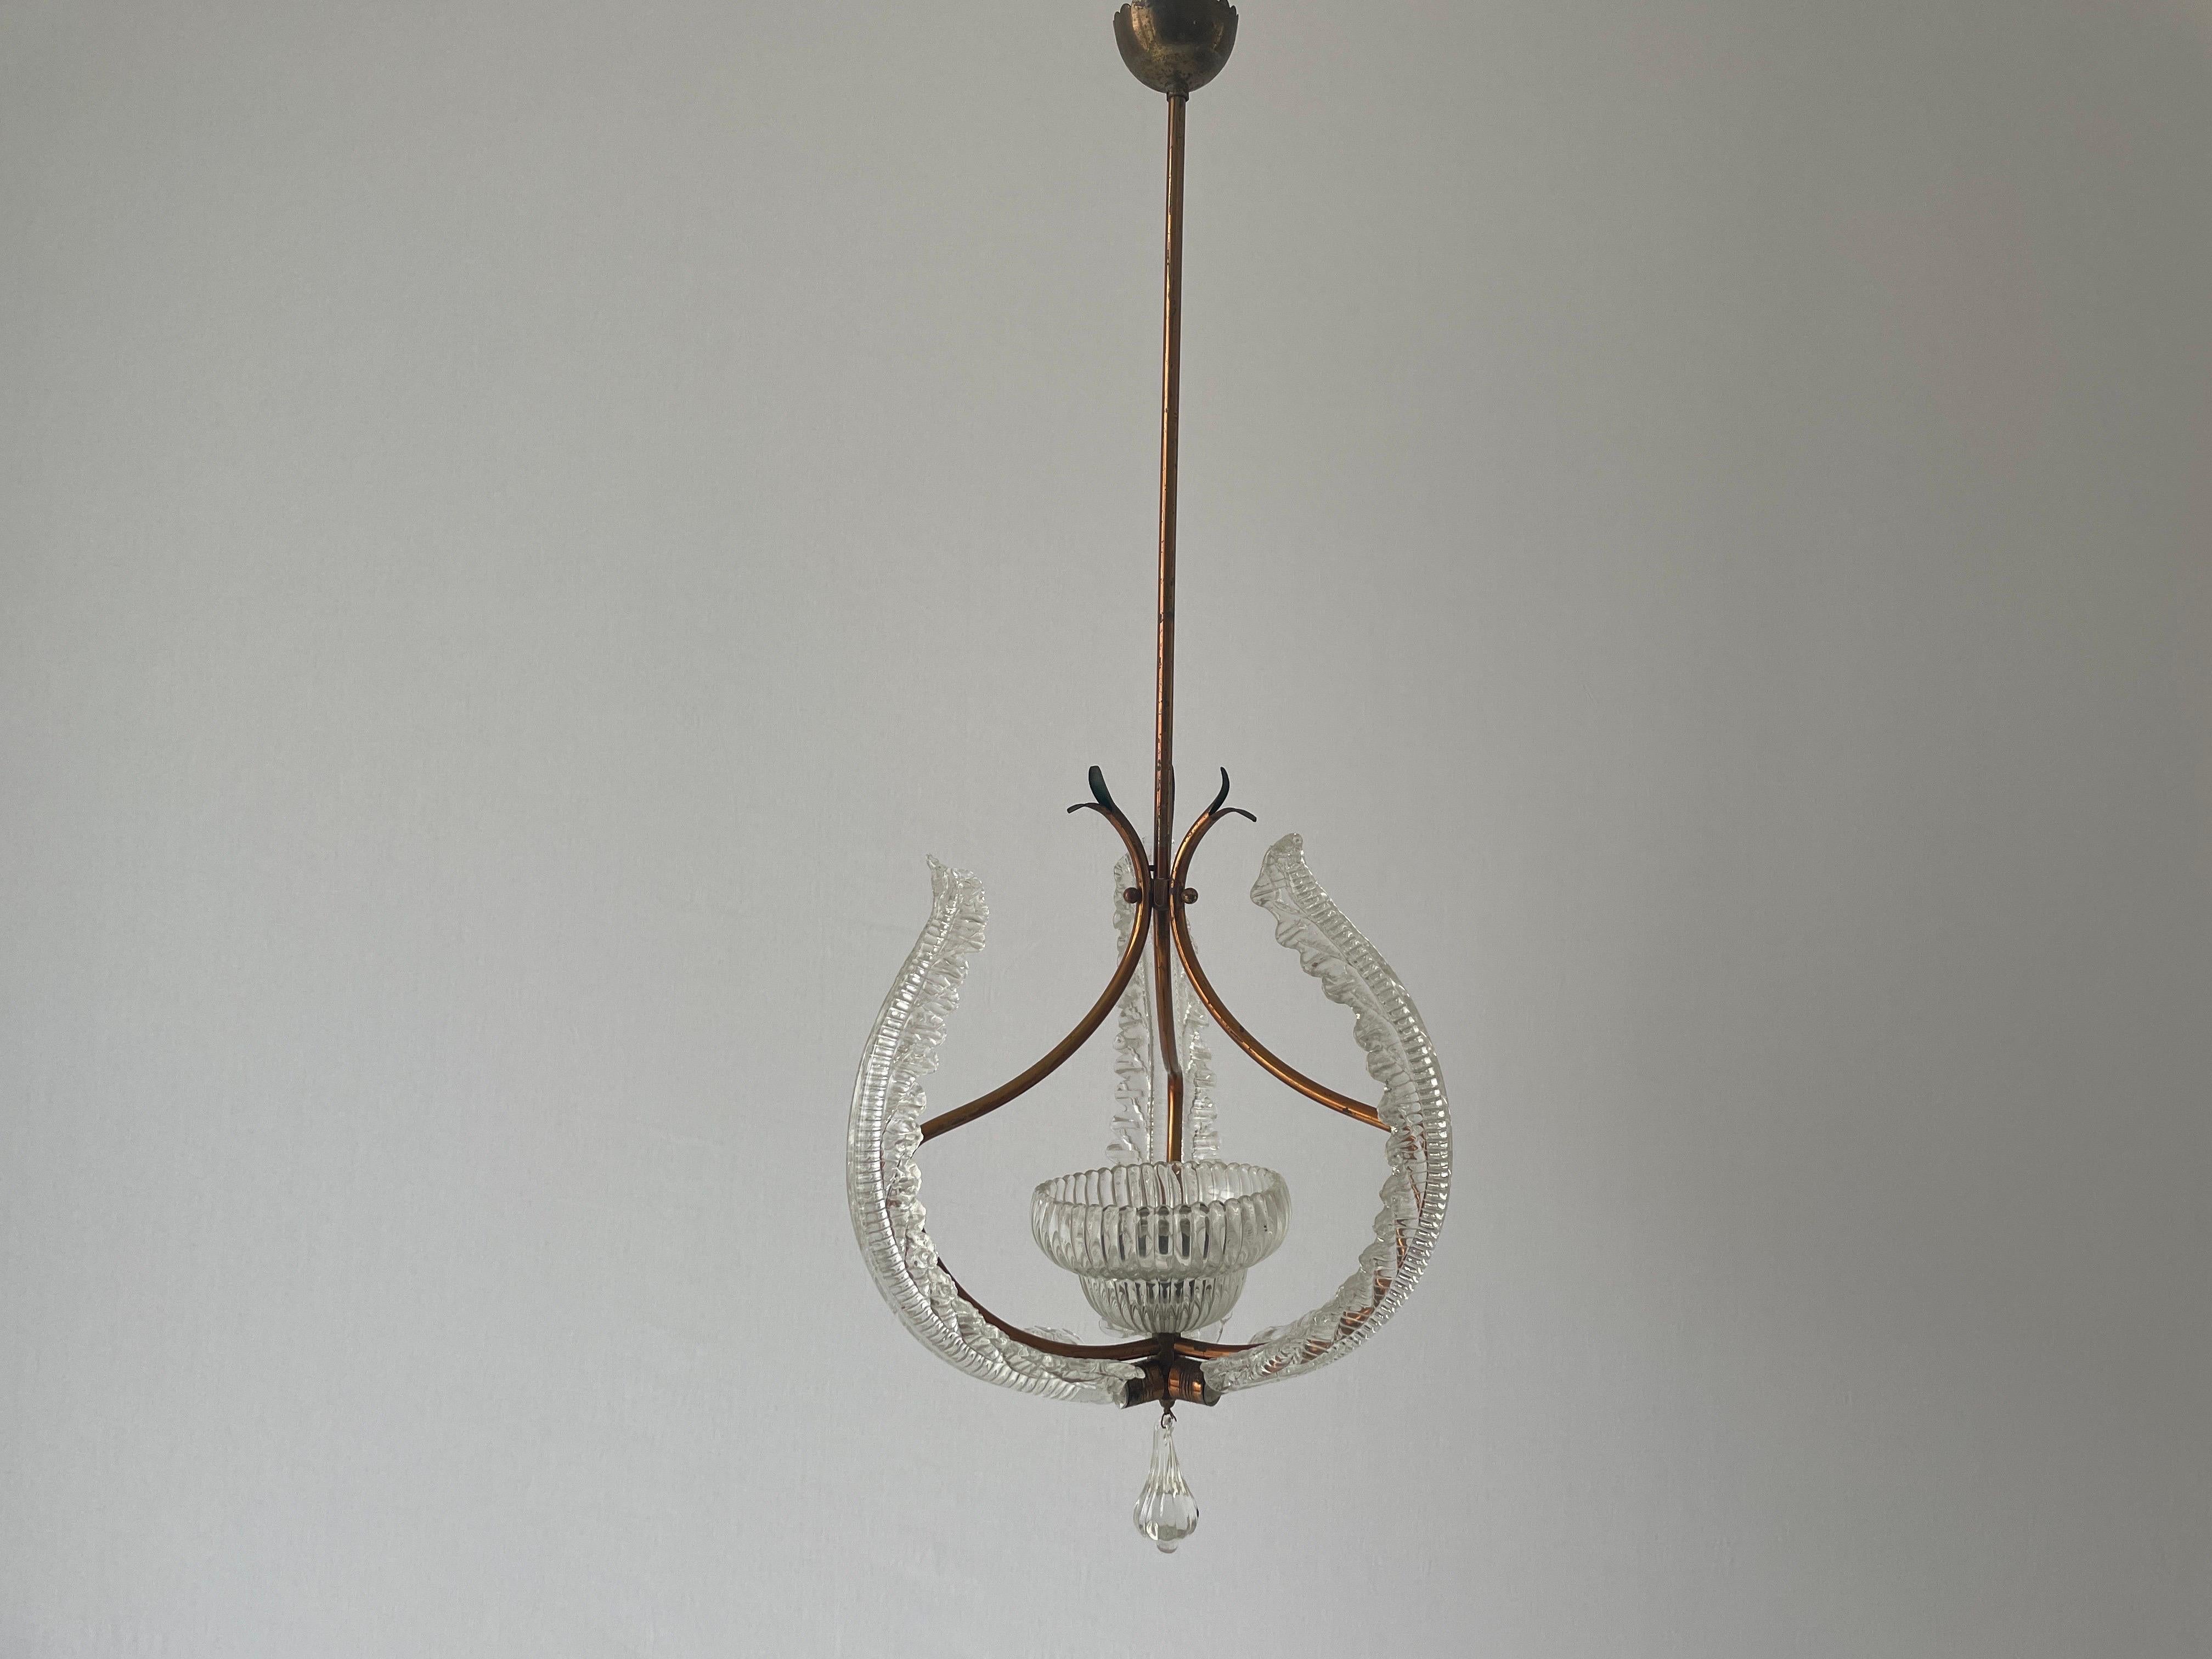 Murano Glass Chandelier by Barovier & Toso, 1940s, Italy For Sale 2